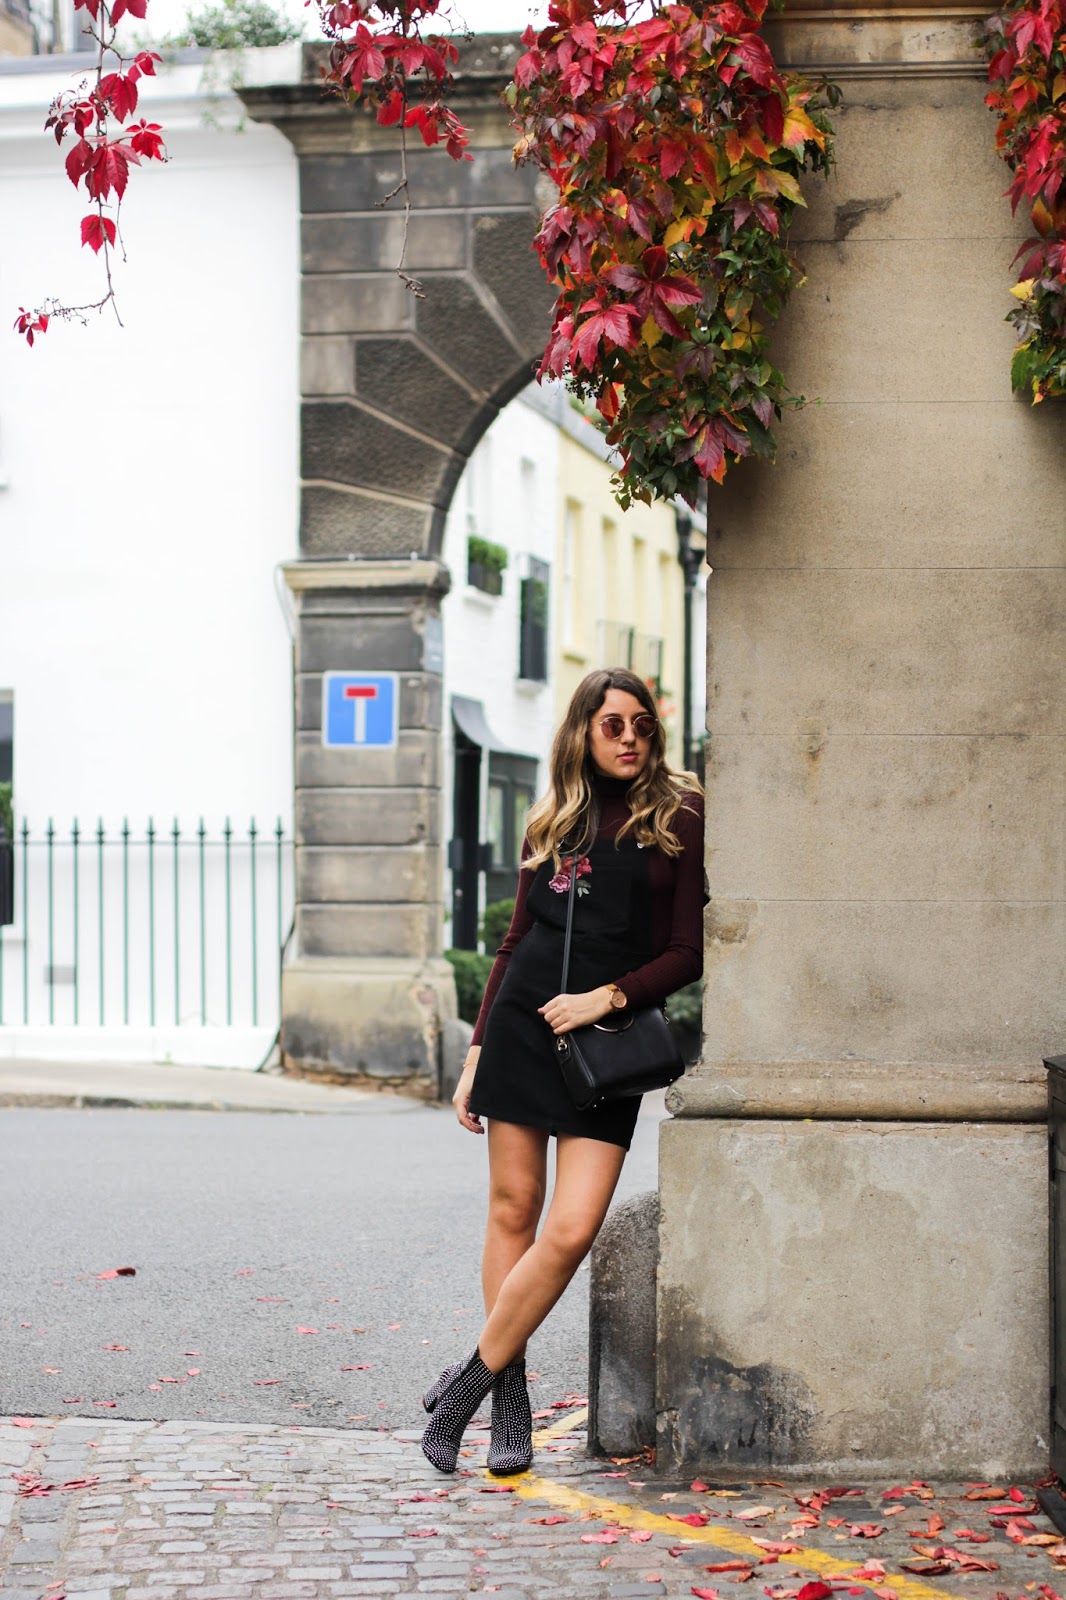 Joanna A. - NXT LVL LBD  Fashion, Backpack outfit, Louis vuitton